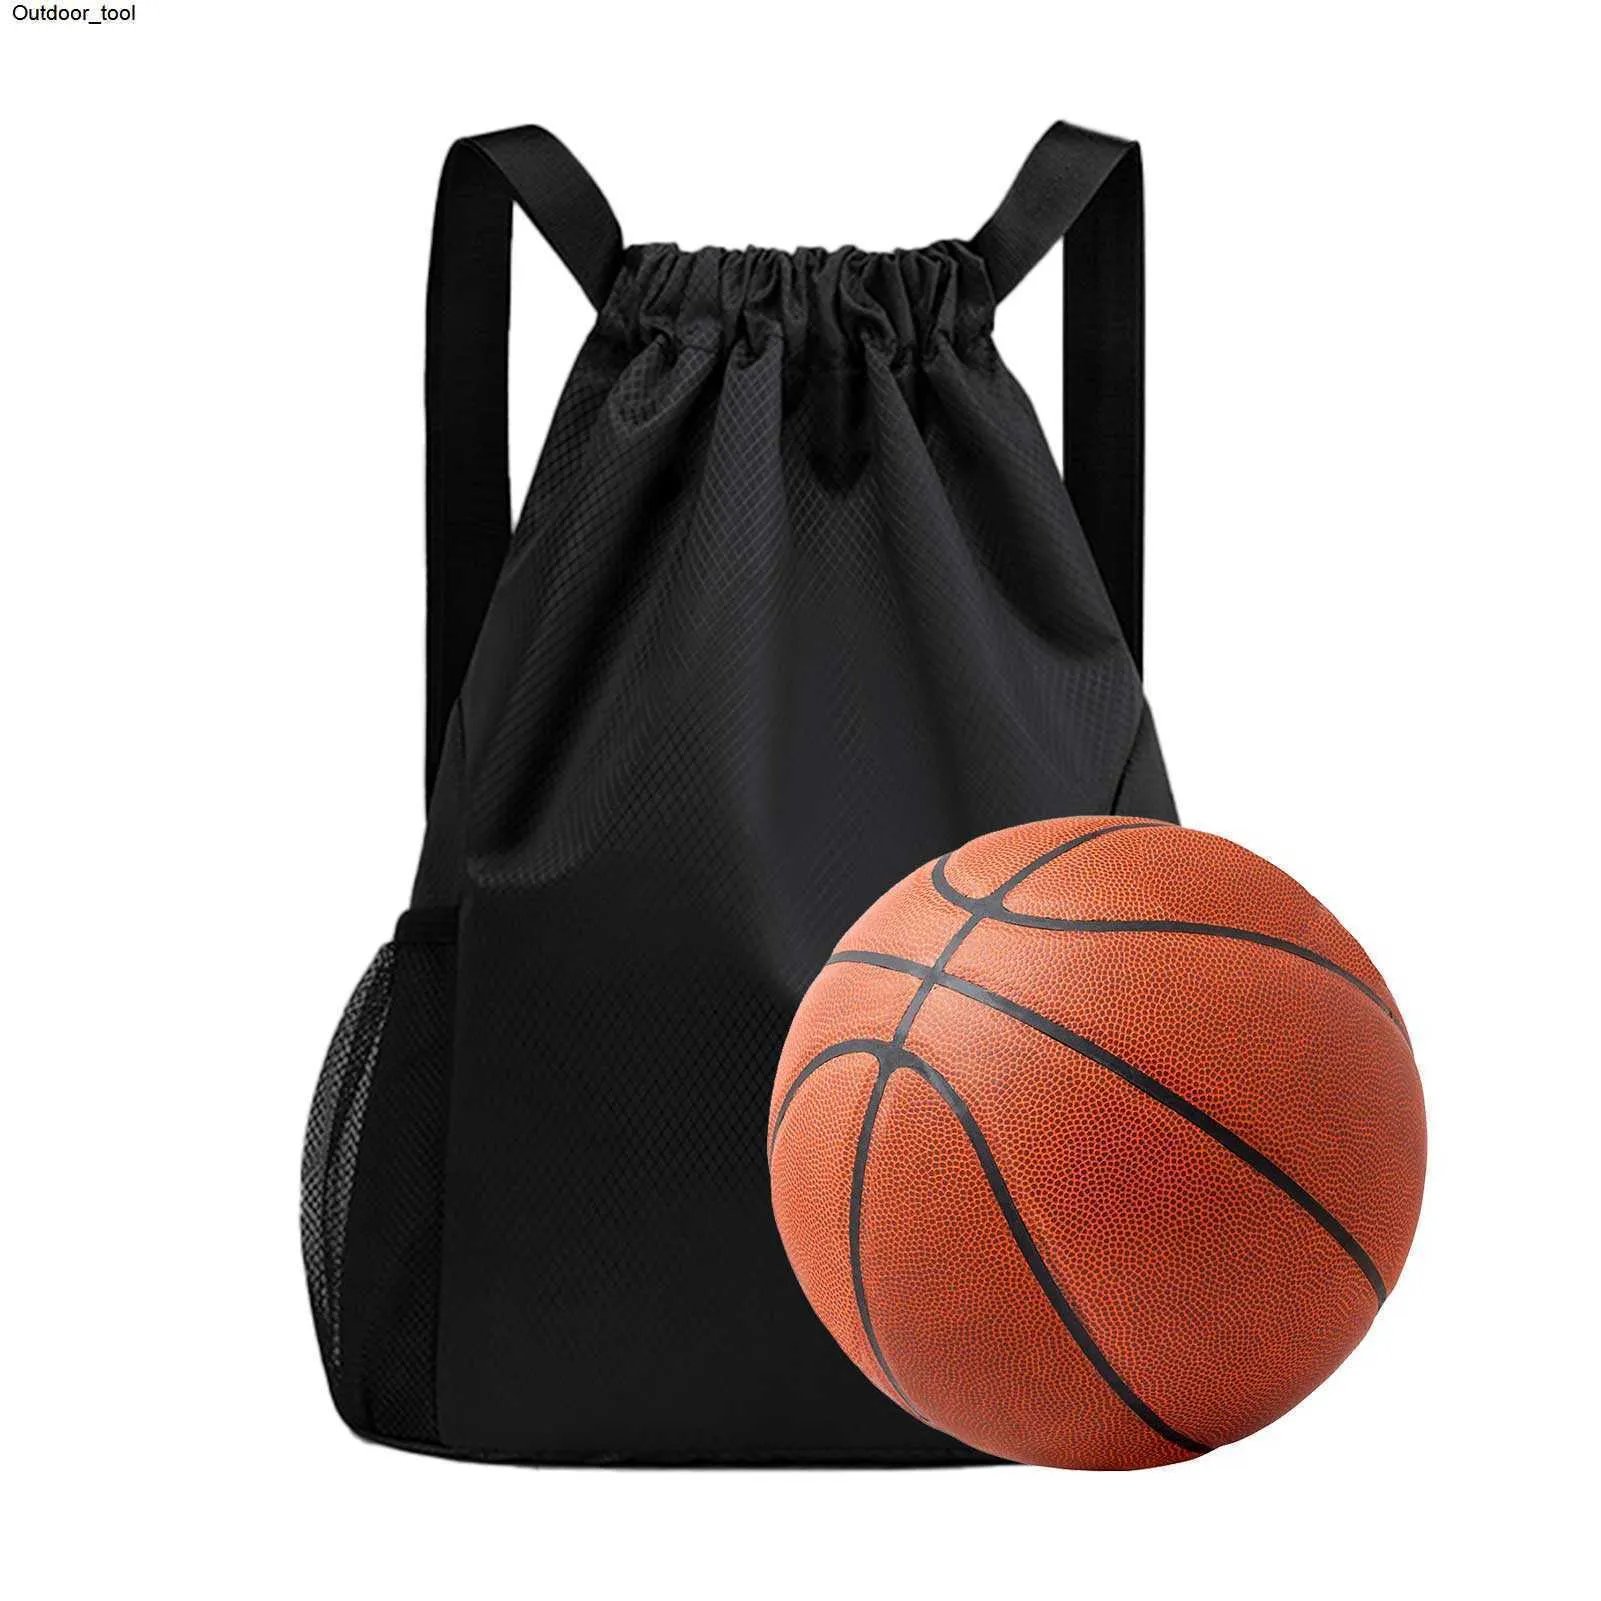 New Waterproof Sport Gym Bag Drawstring Sack Fitness Travel Outdoor Backpack Shopping Bags Swimming Basketball Yoga